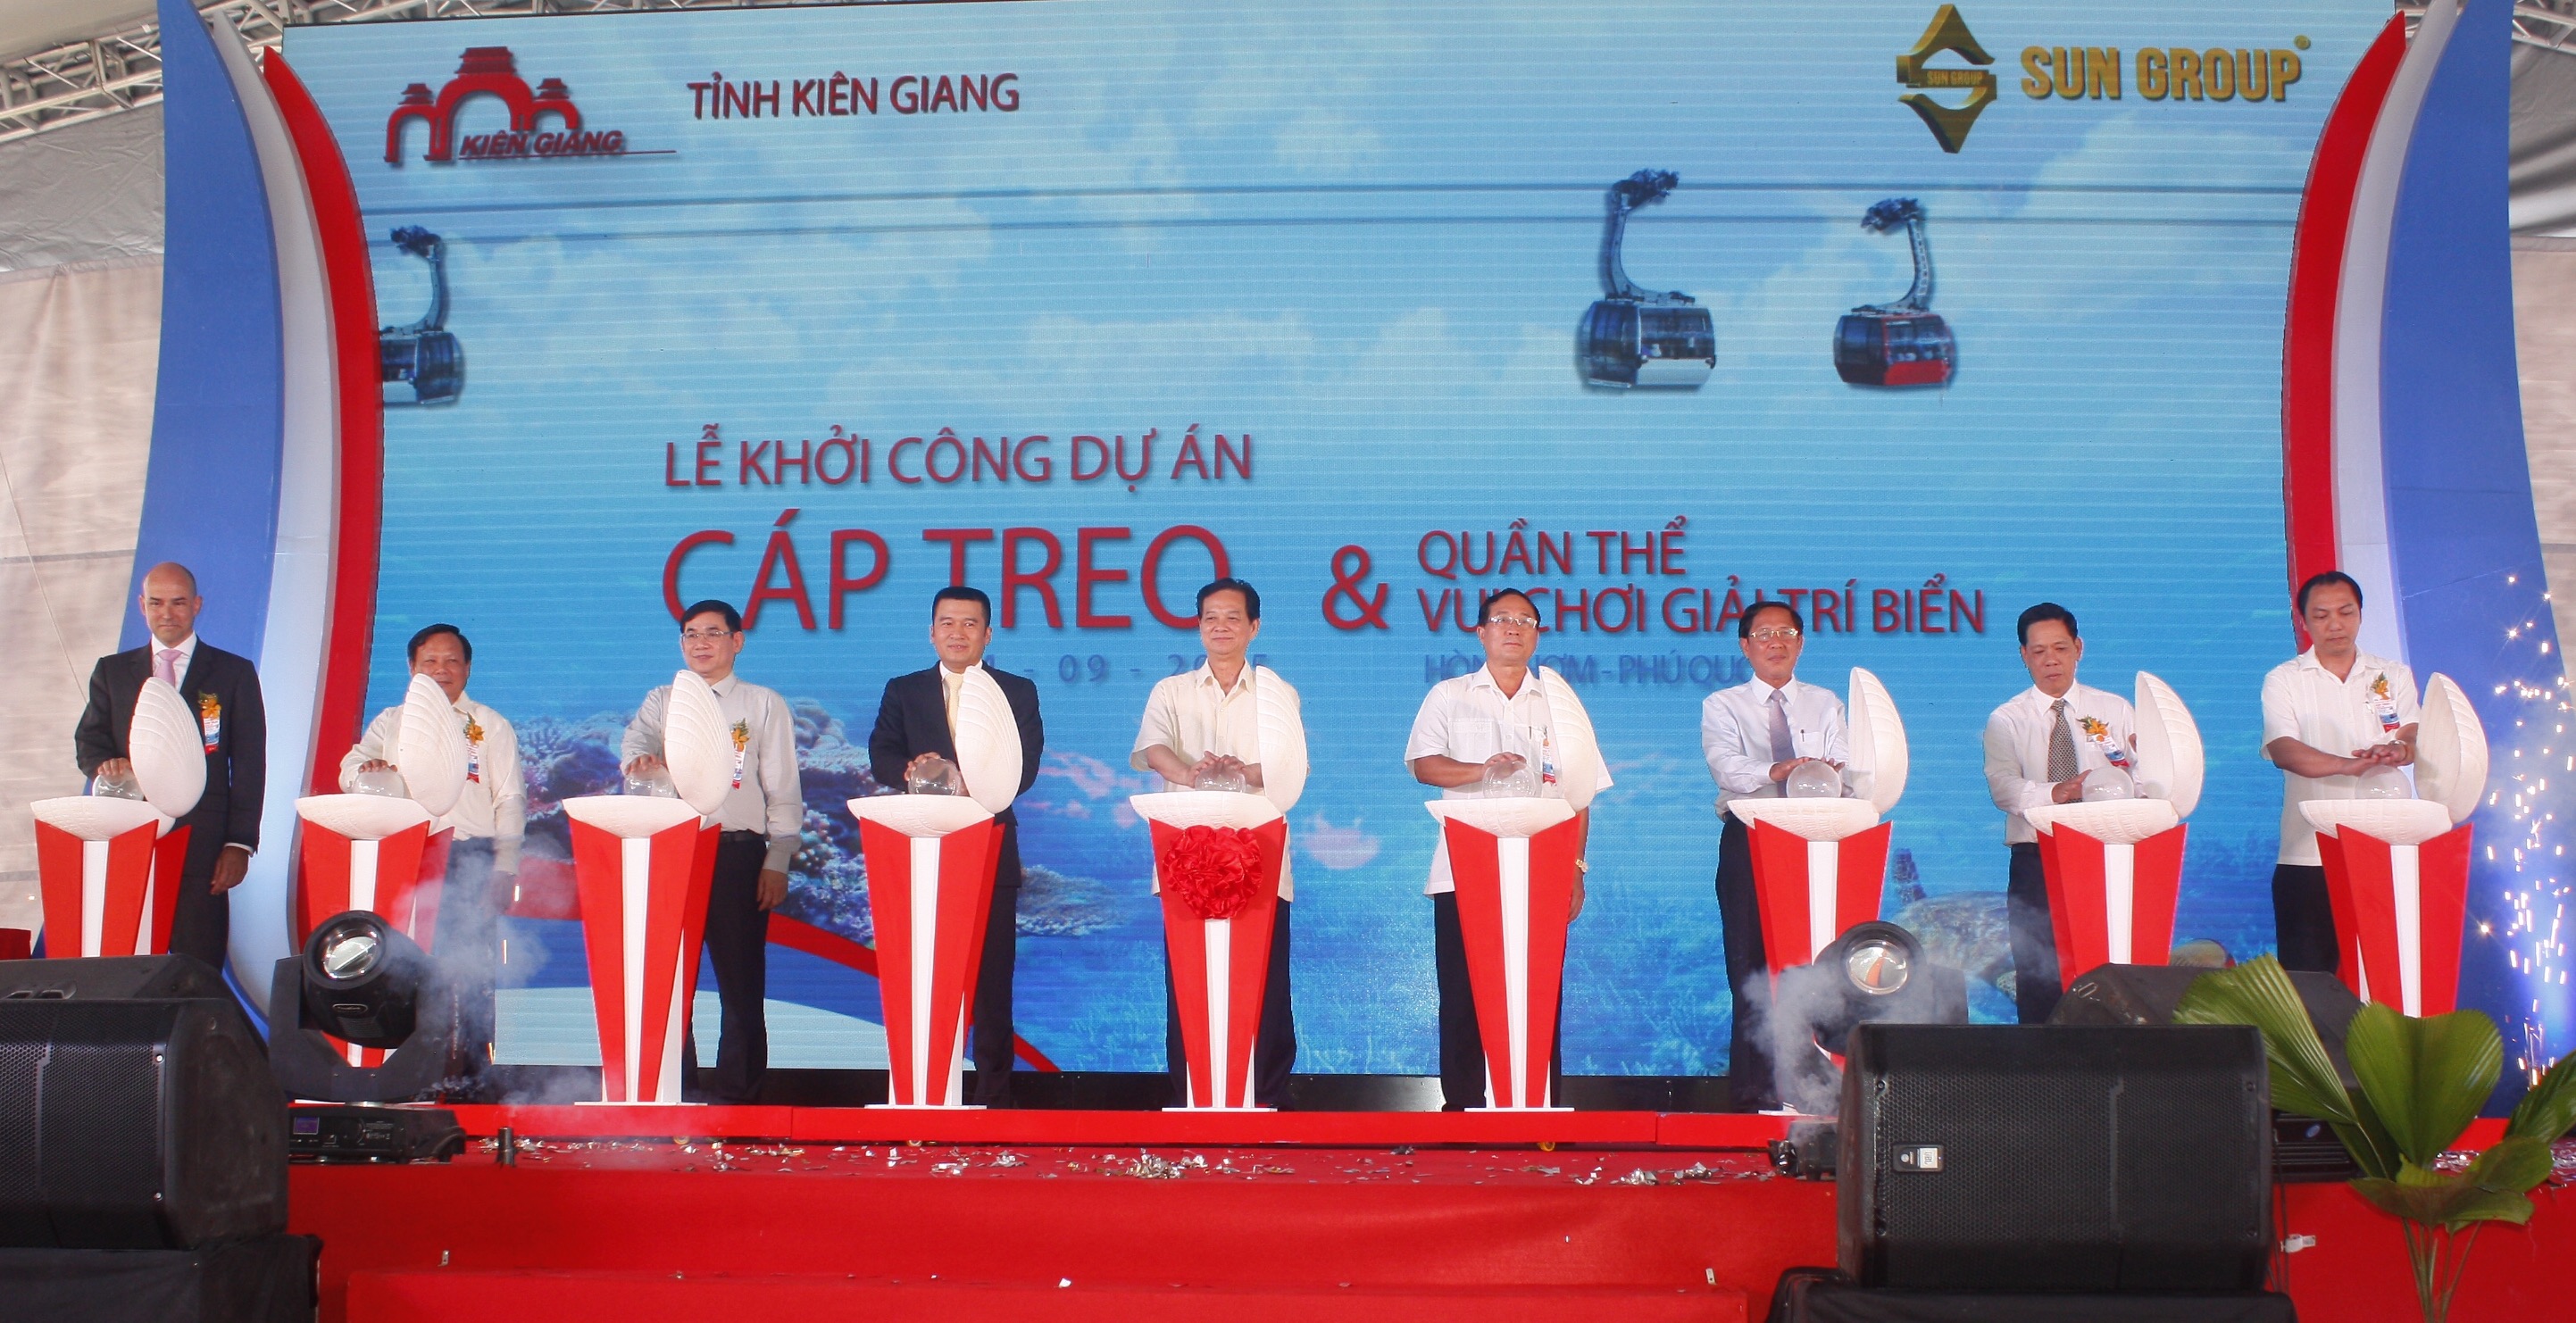 Work starts for cable car, electric transmission systems off southern Vietnam